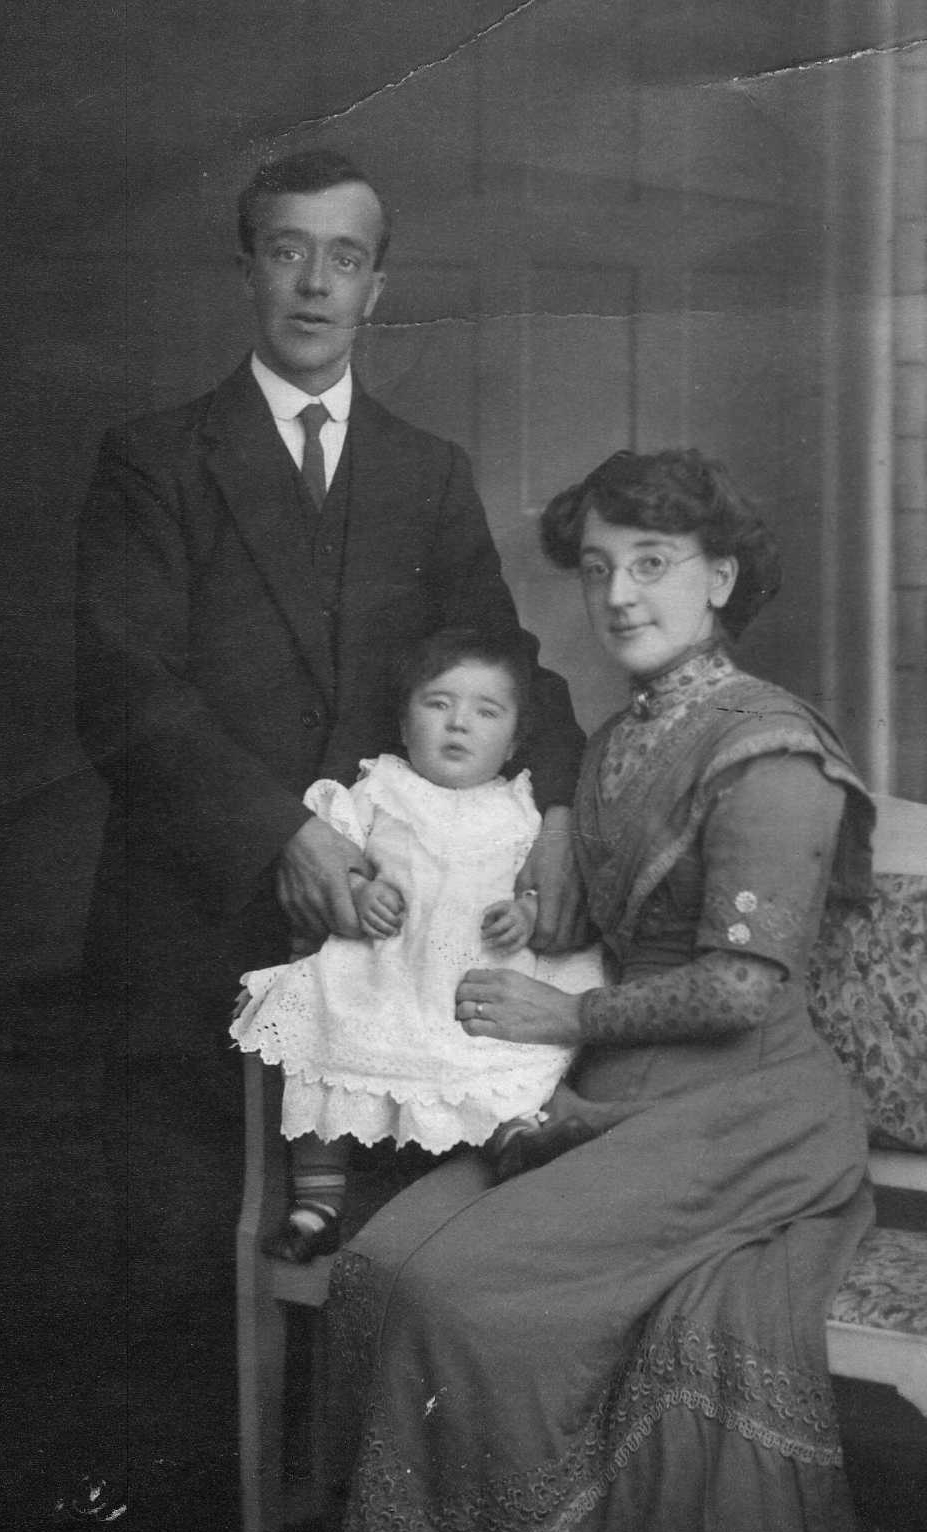 Skeels_William_Robertwith_wife_Beatrice_and_daughter_Beatrice_in_1915